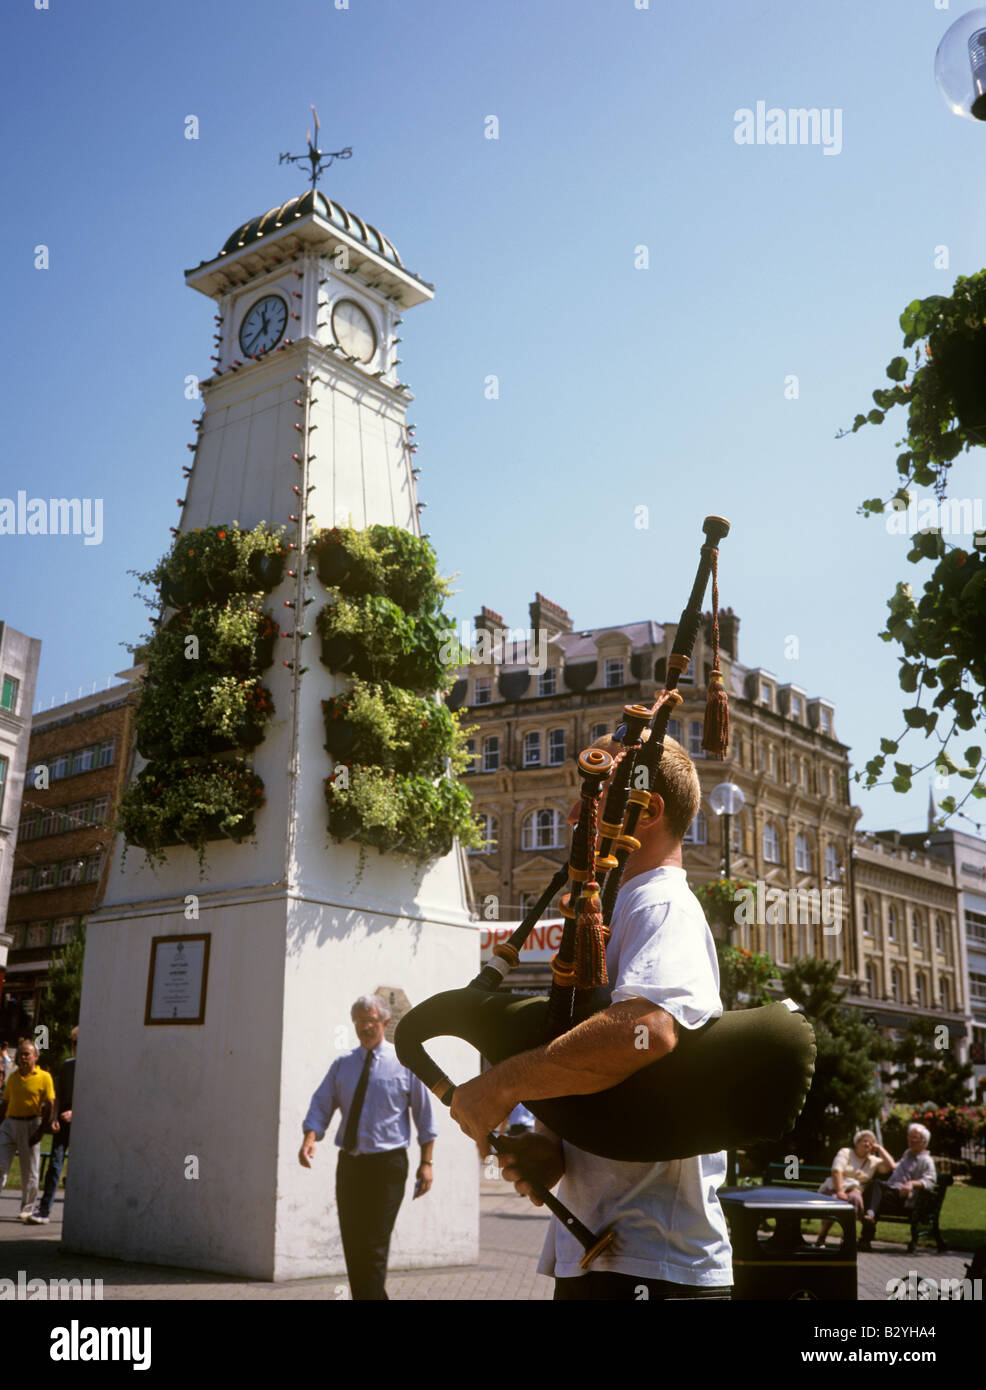 UK England Dorset Bournemouth busker playing bagpipes in the square Stock Photo